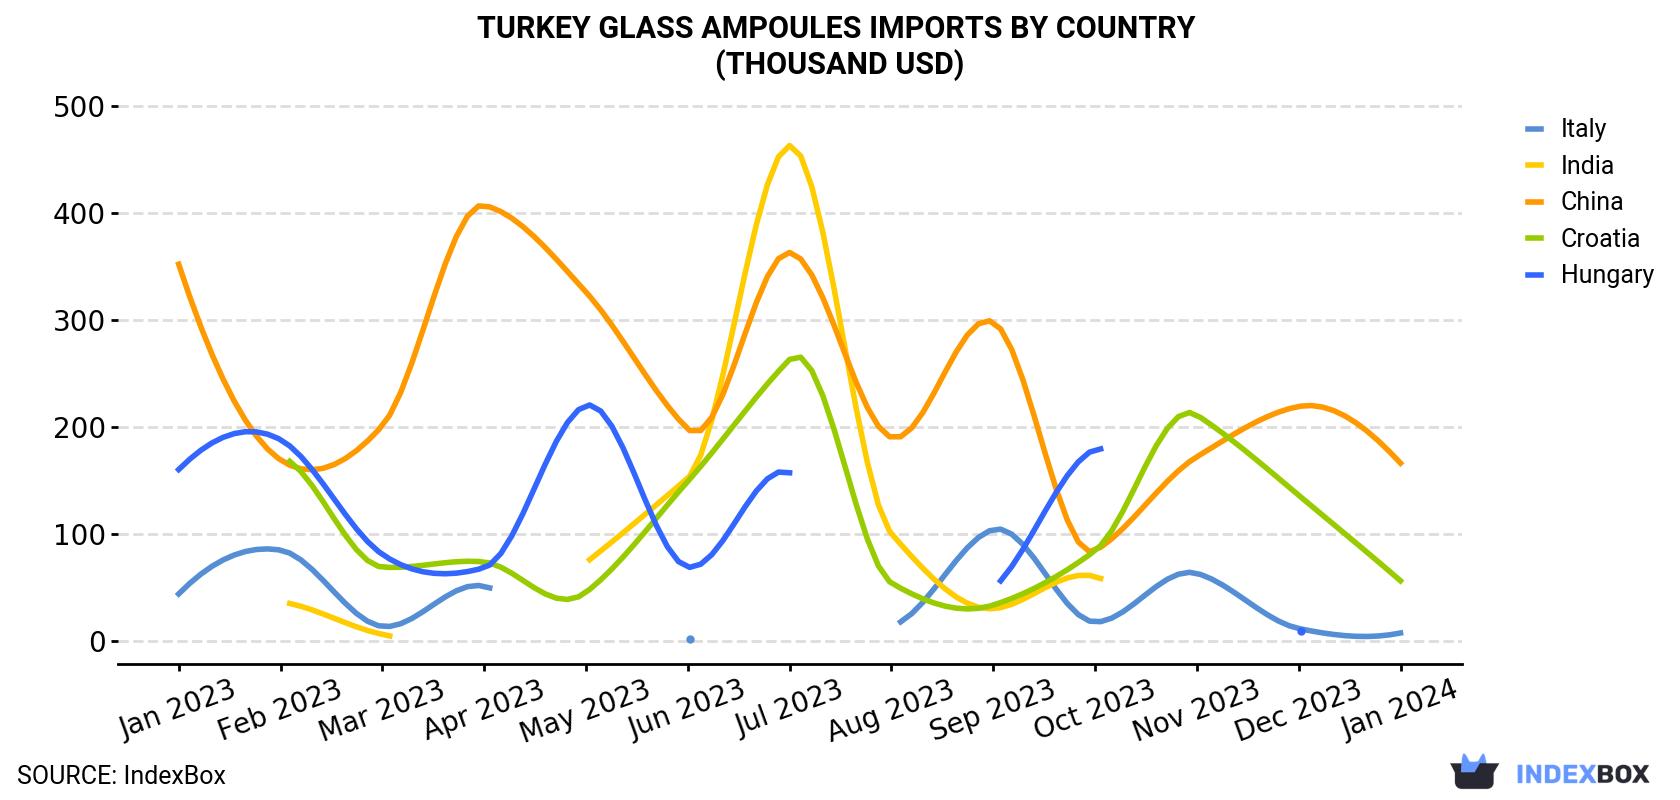 Turkey Glass Ampoules Imports By Country (Thousand USD)